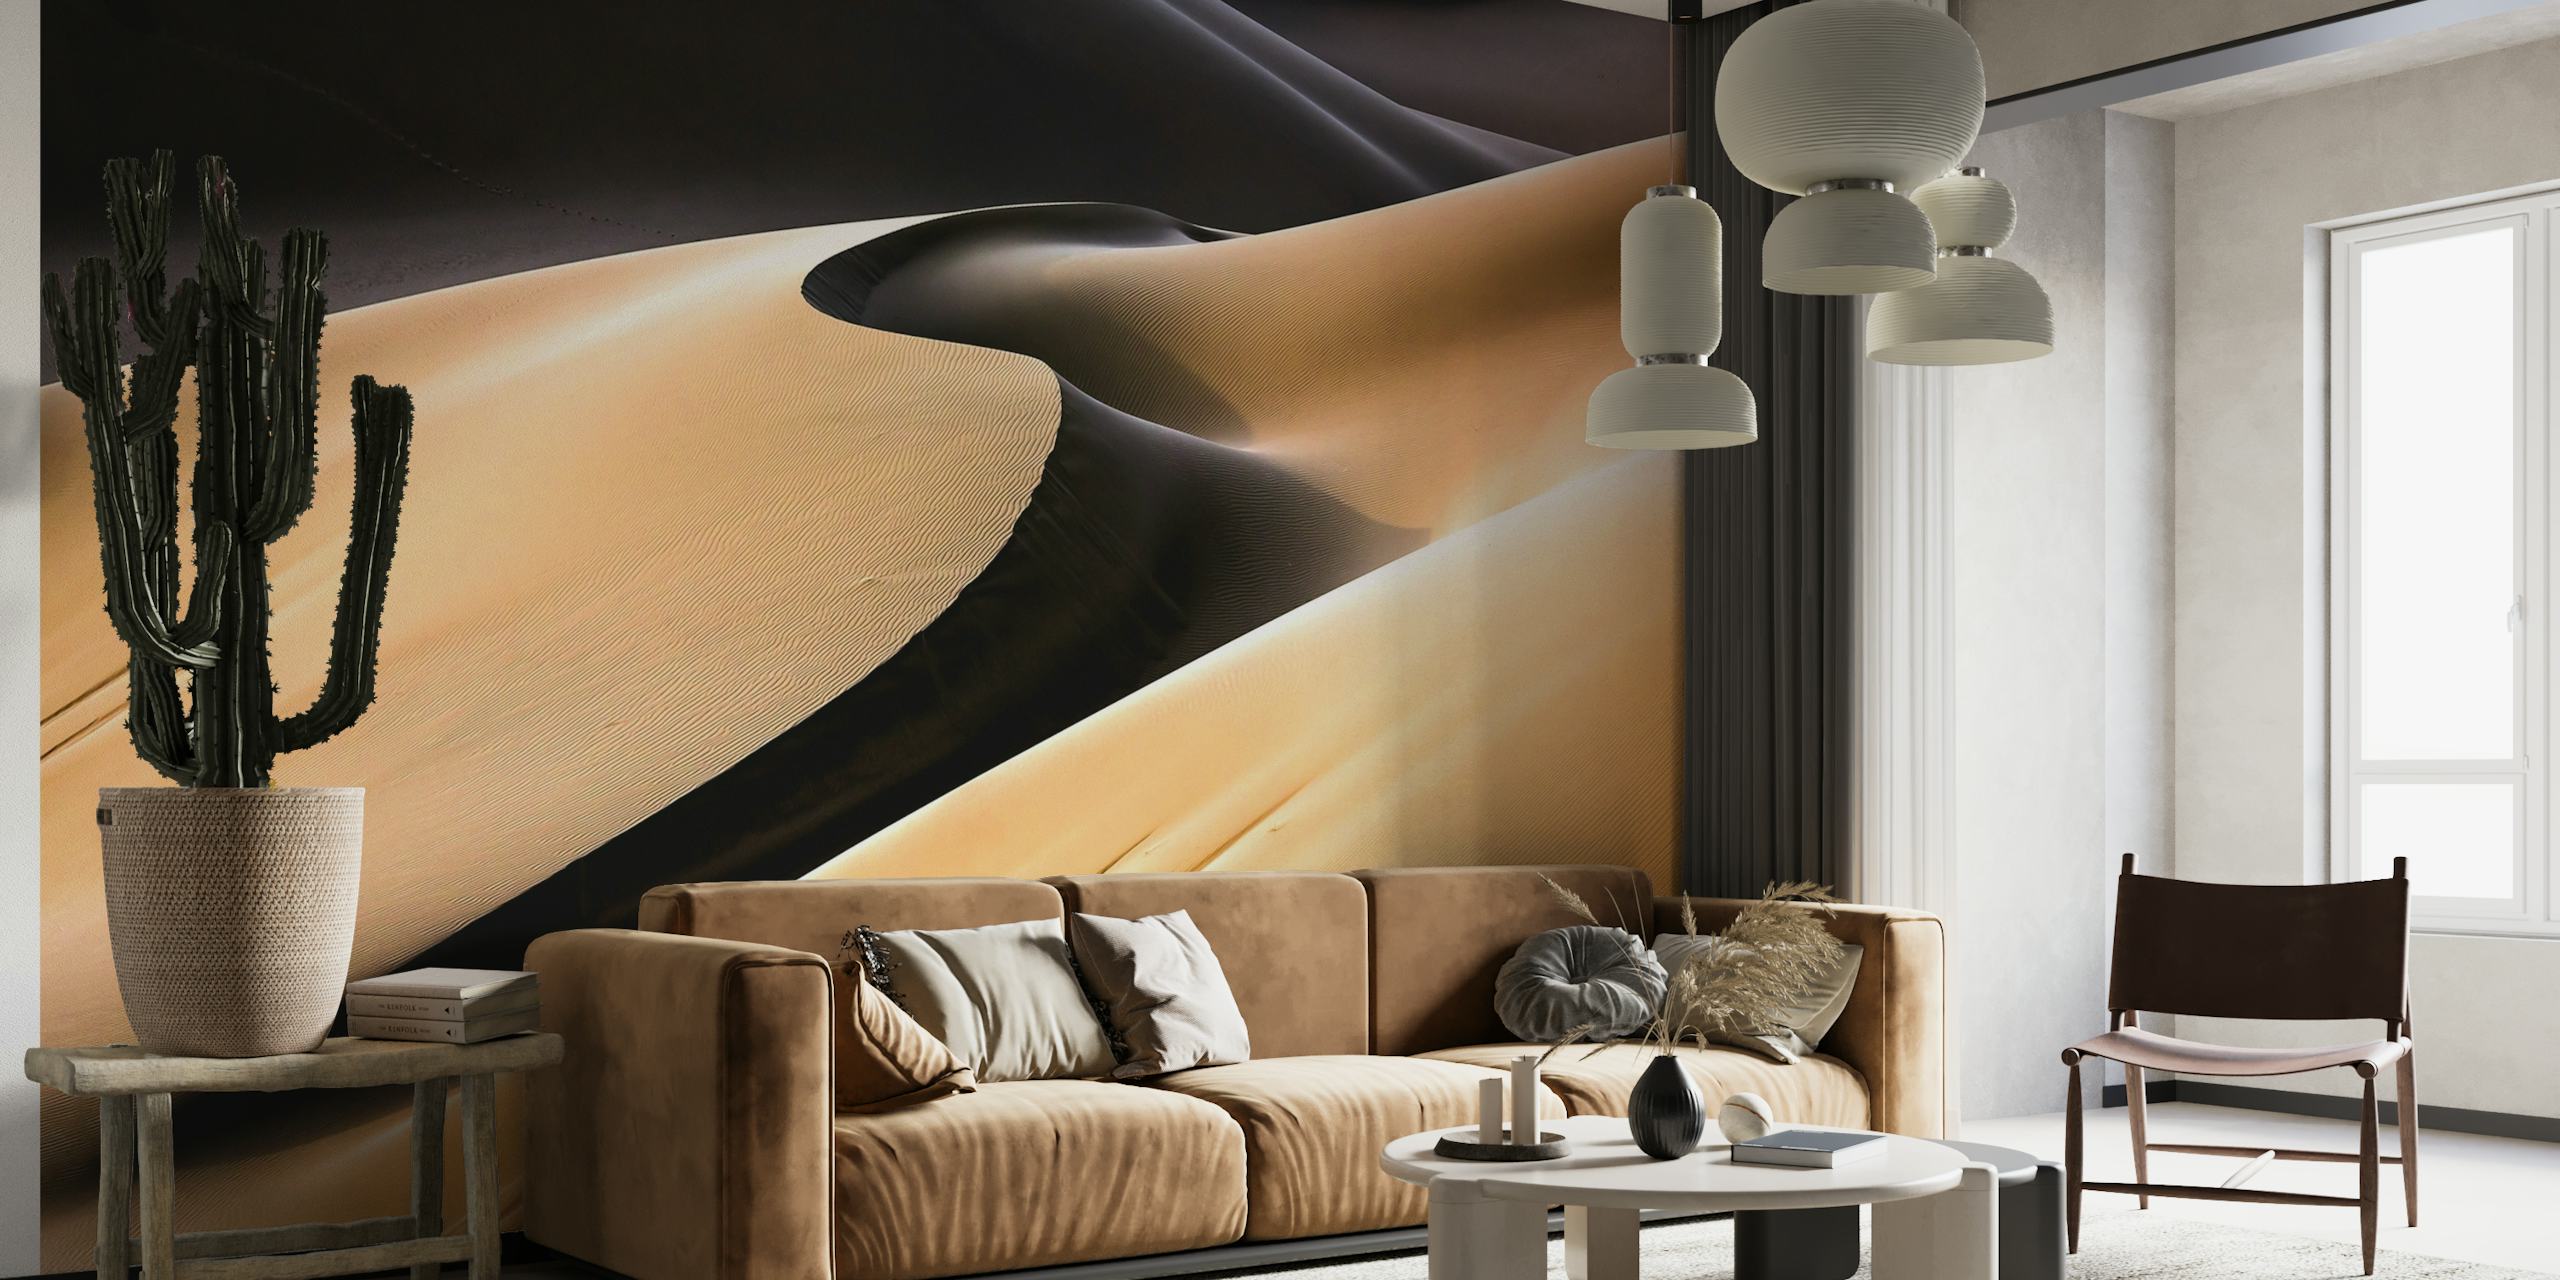 Abstract desert dunes wall mural capturing light and shadow